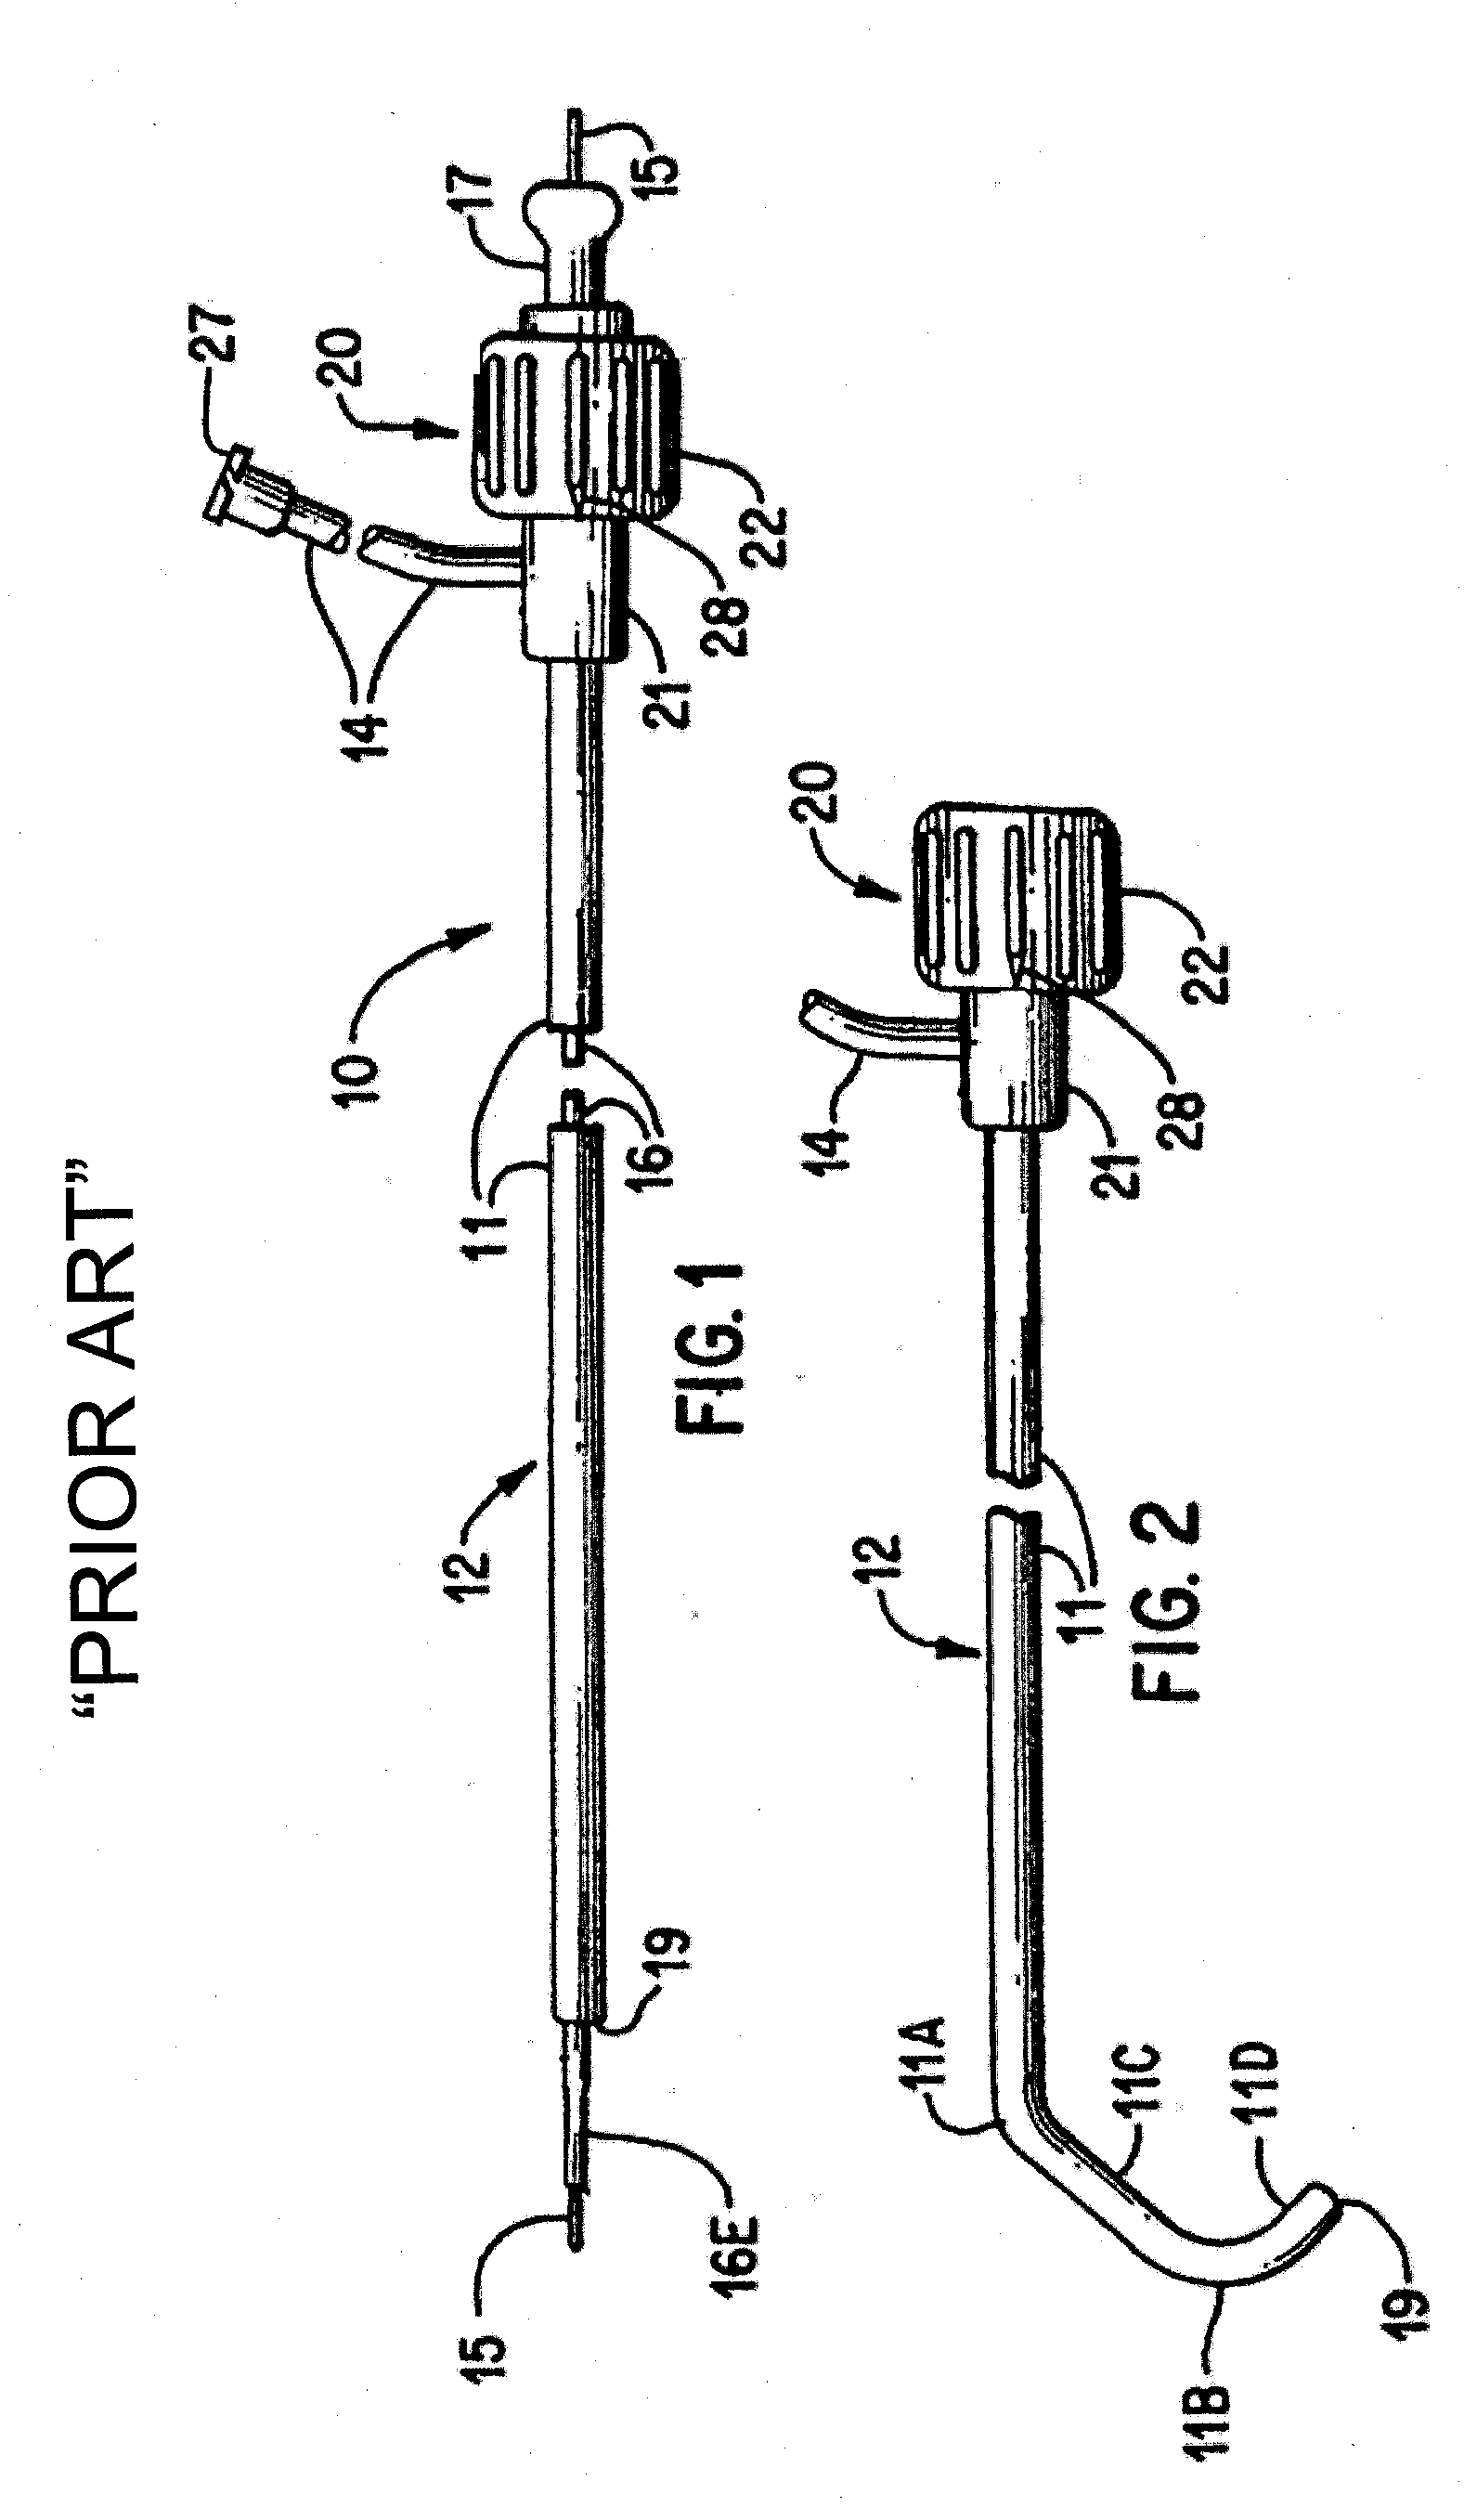 System and method for performing angiography and stenting